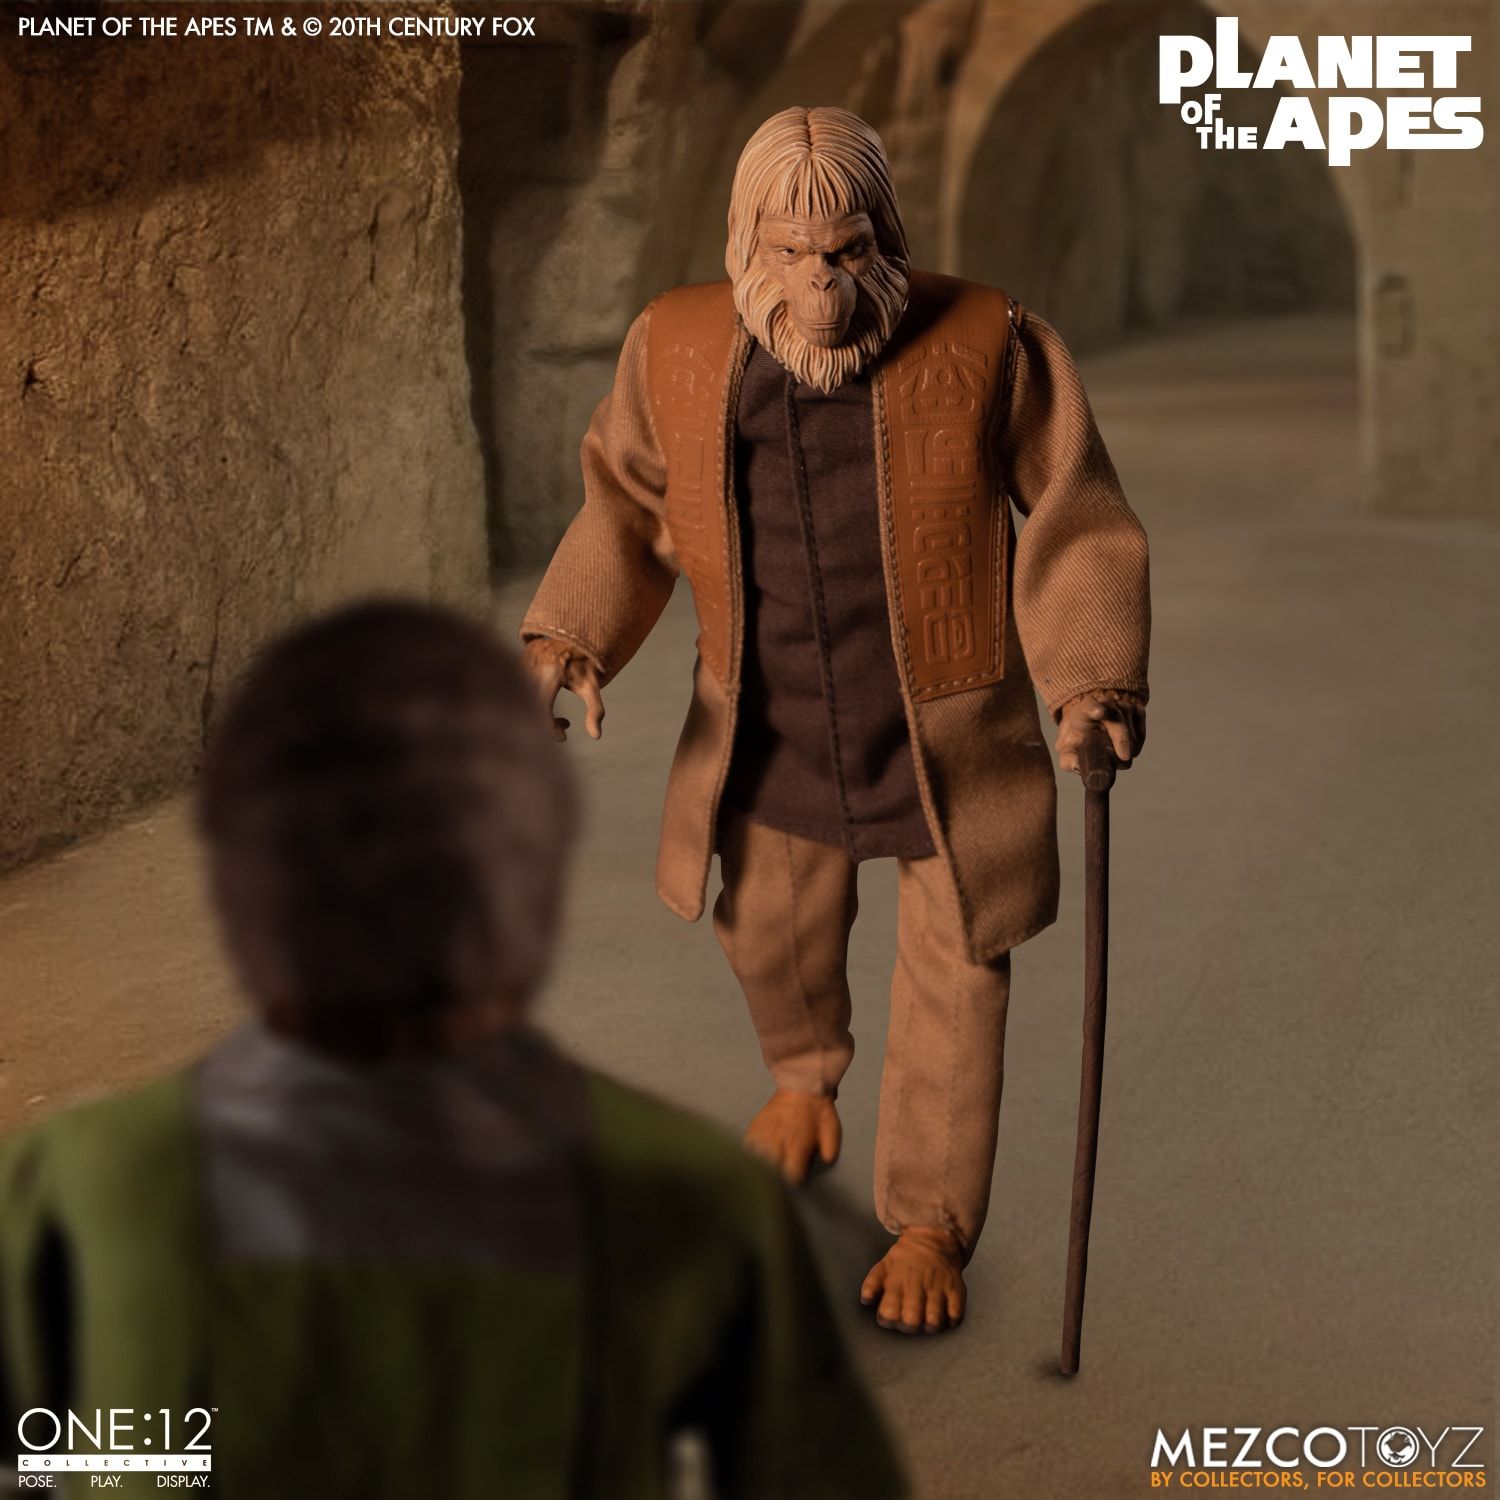 New Product: Mezco Planet of the Apes Dr. Zaius 8347